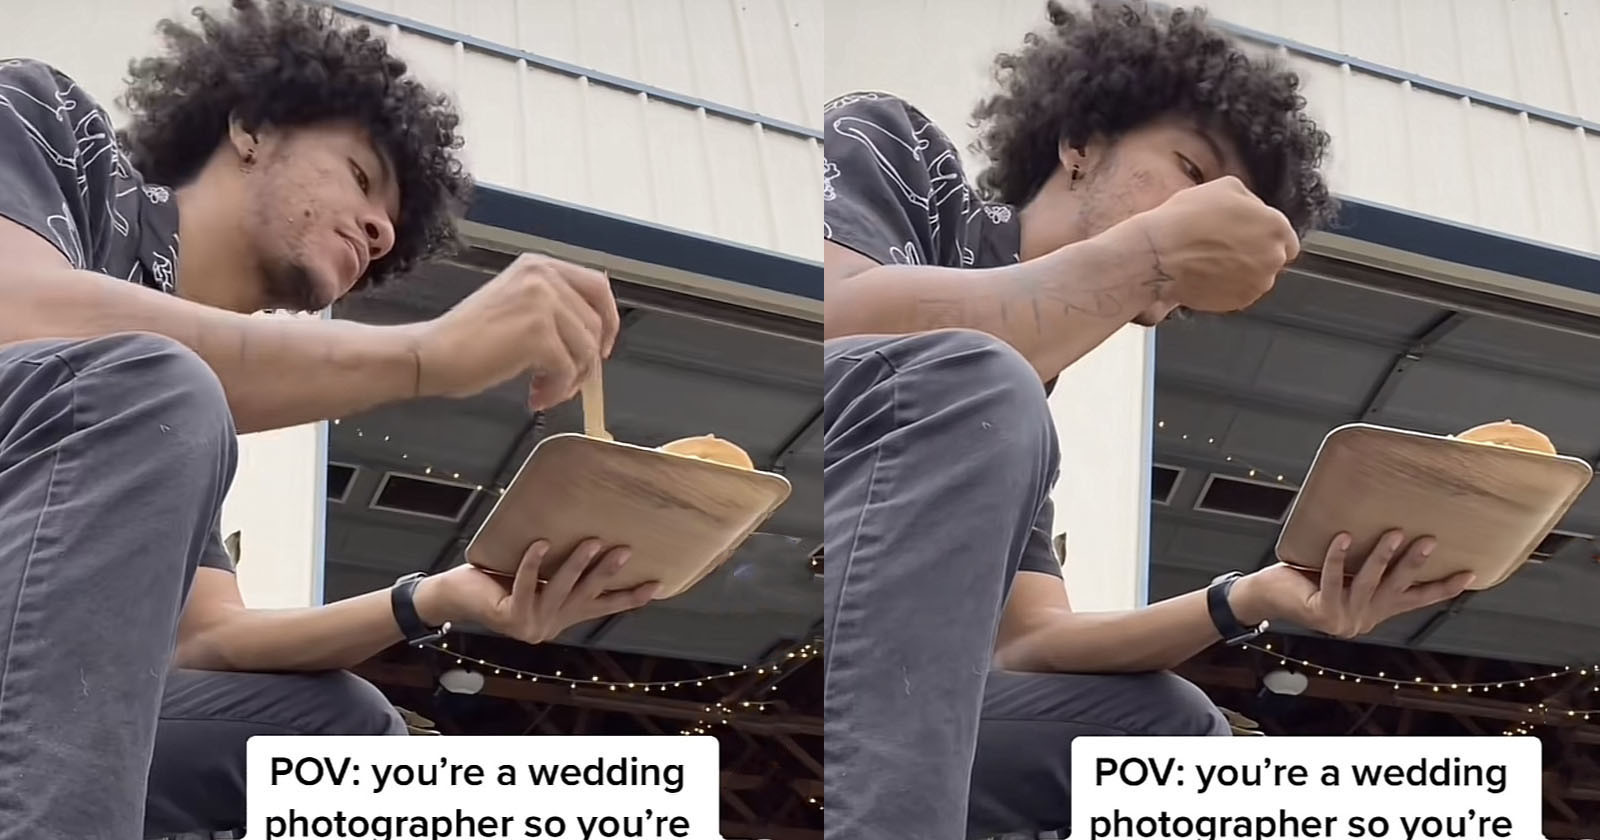  wedding photographer eating alone sparks debate how they 